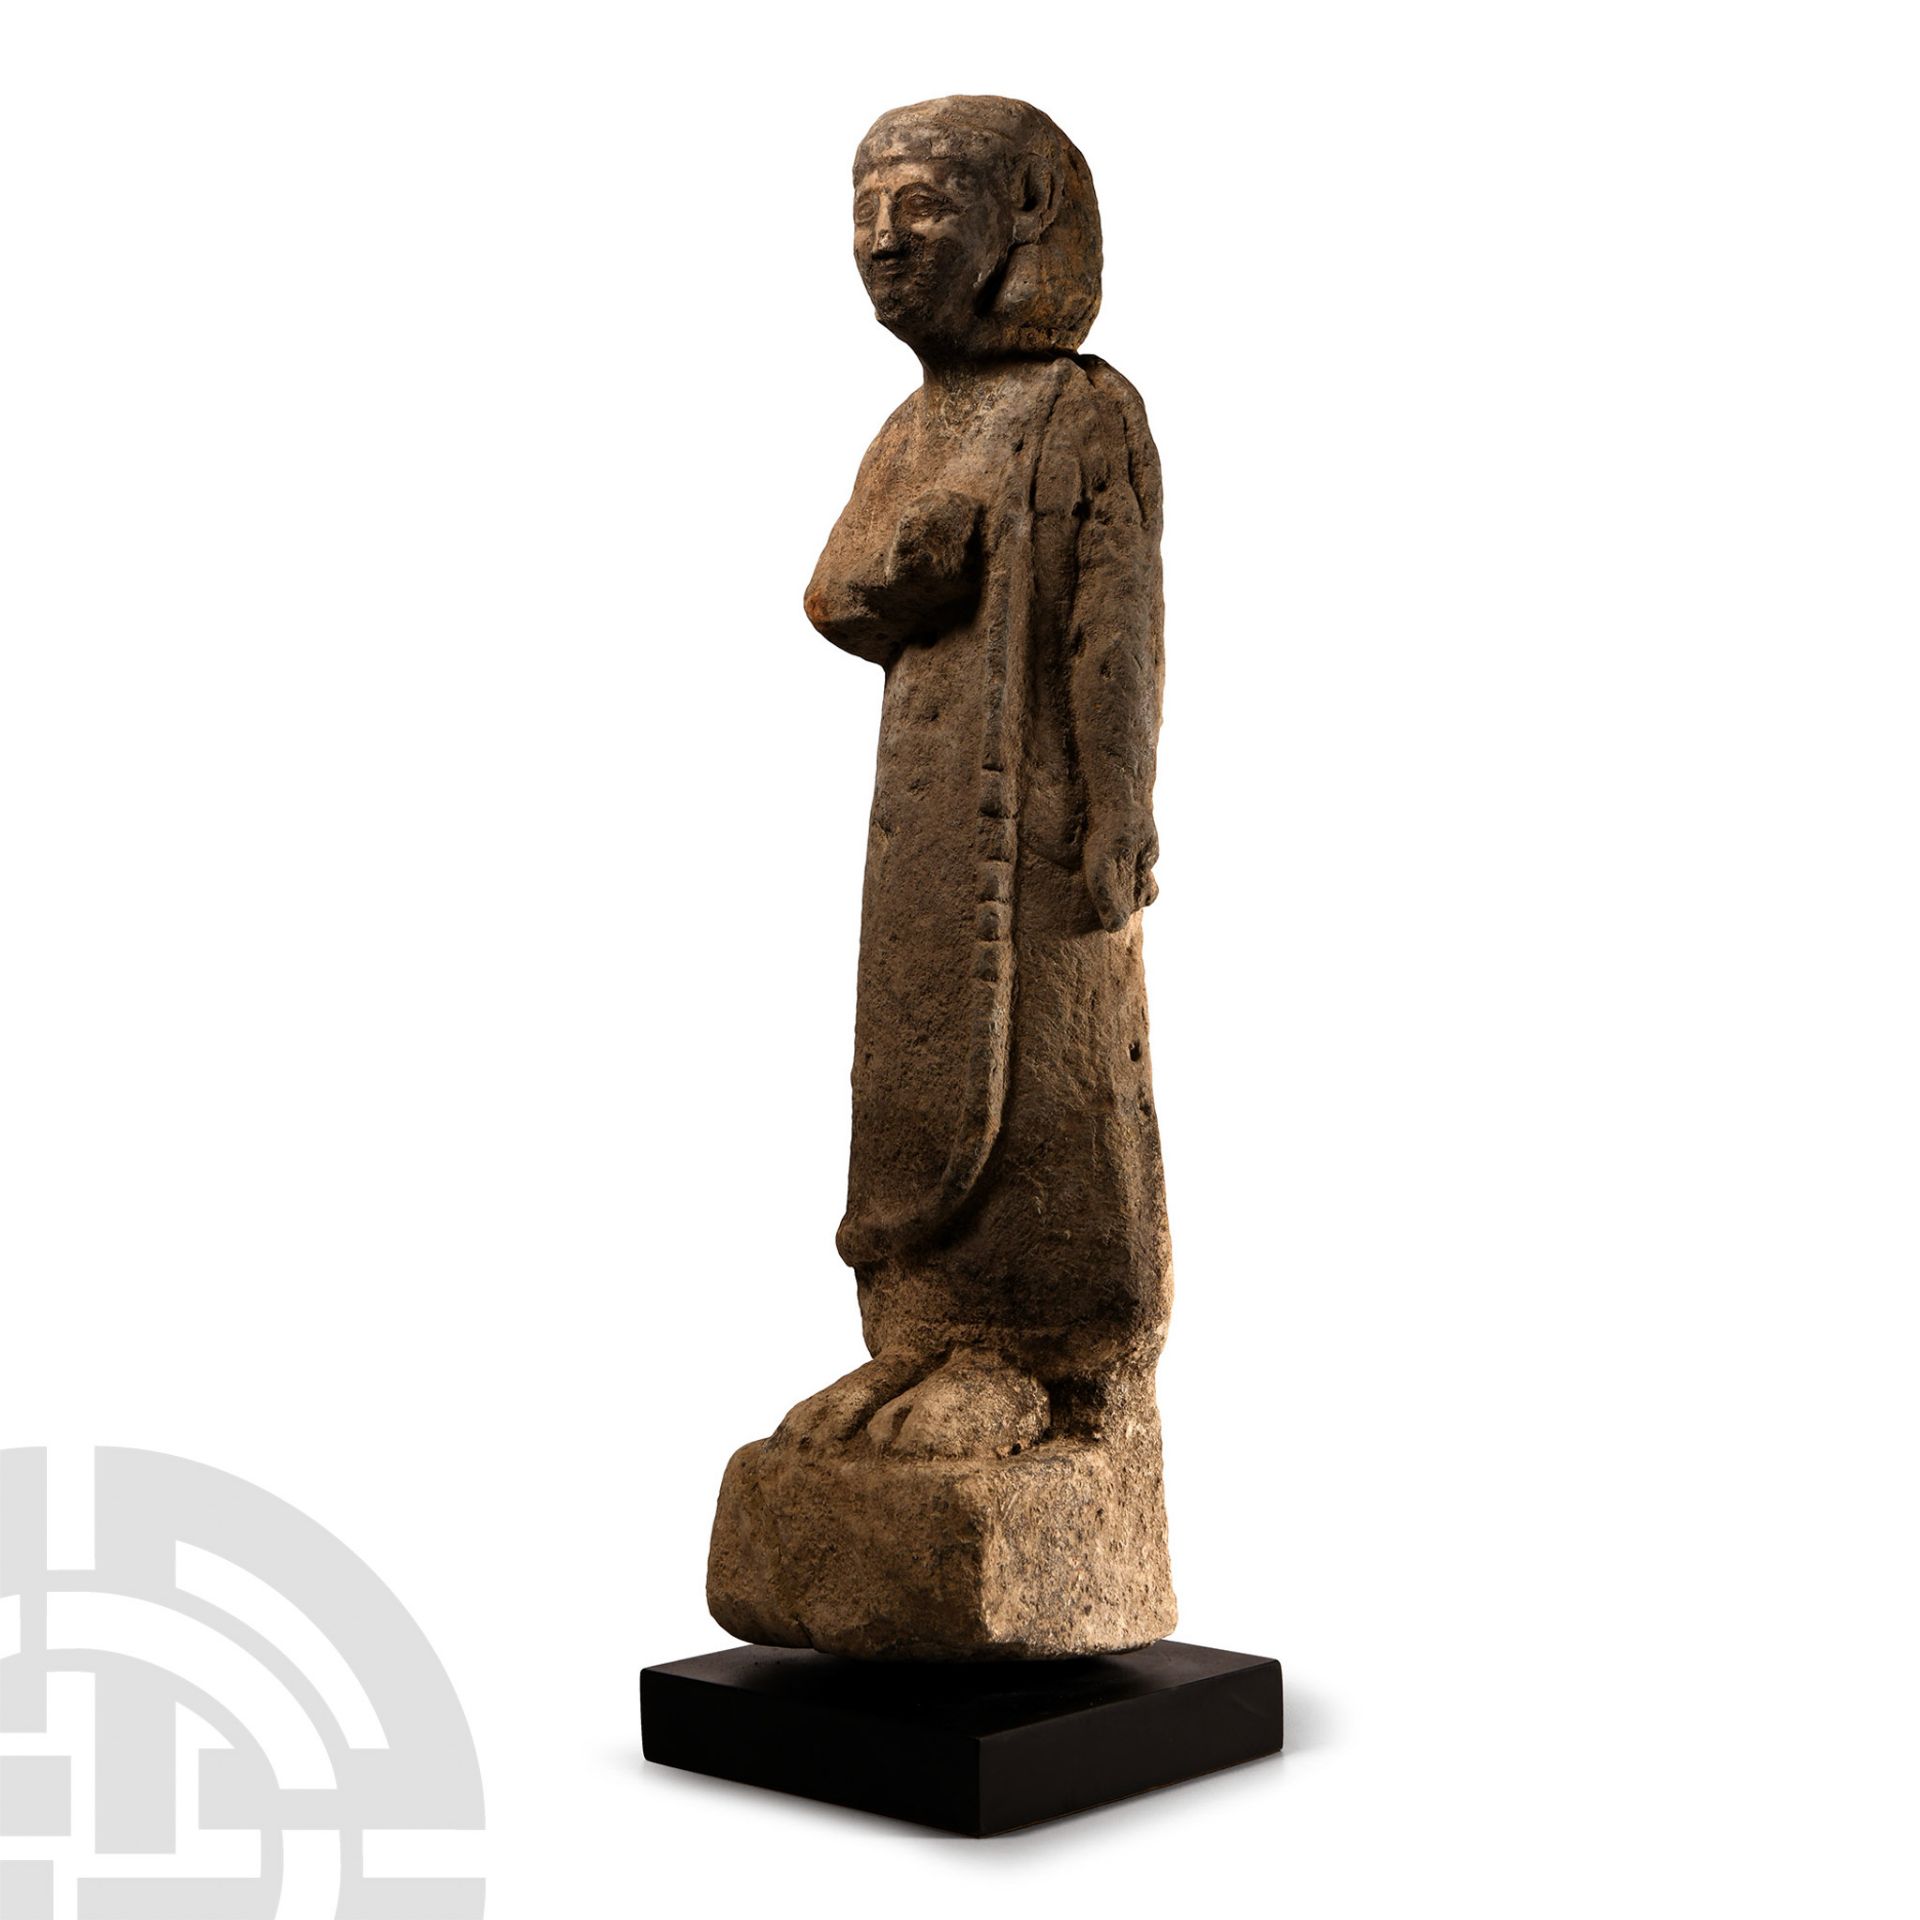 Cypriot Archaic Stone Statue of a Votary - Image 3 of 4